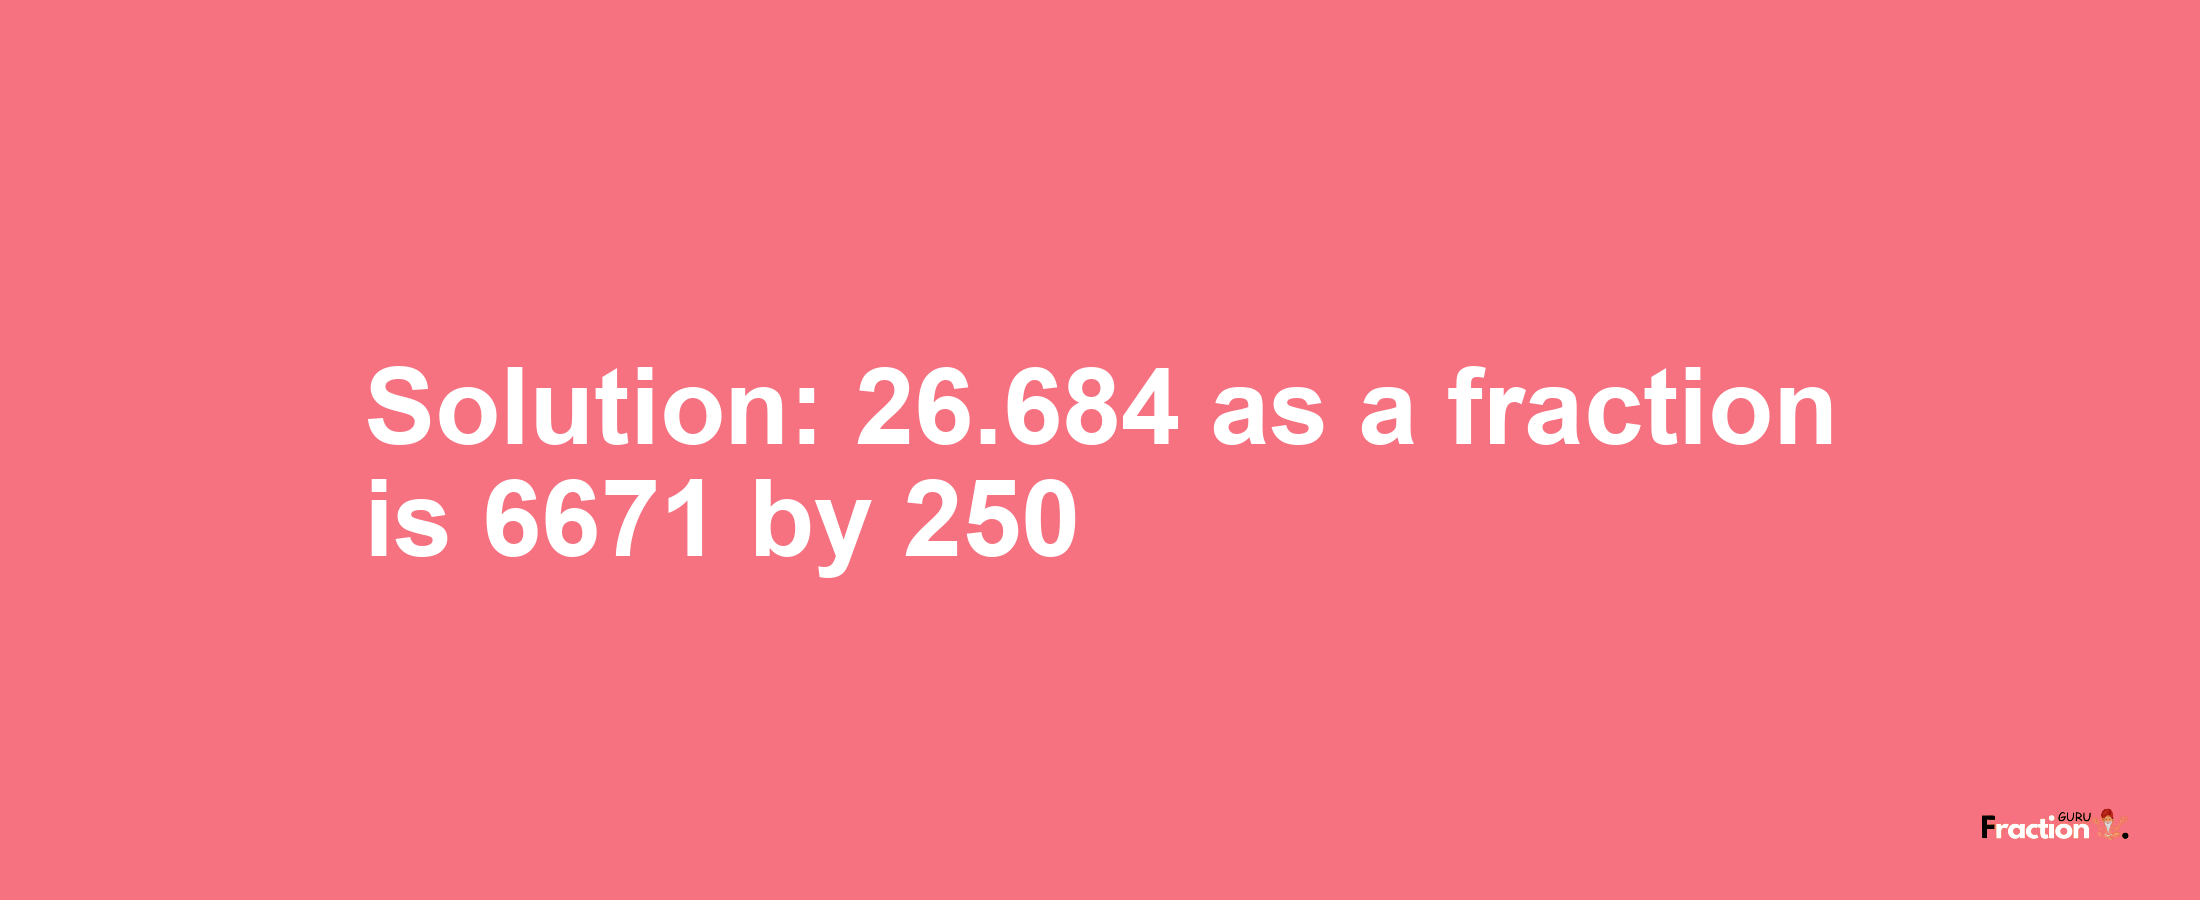 Solution:26.684 as a fraction is 6671/250